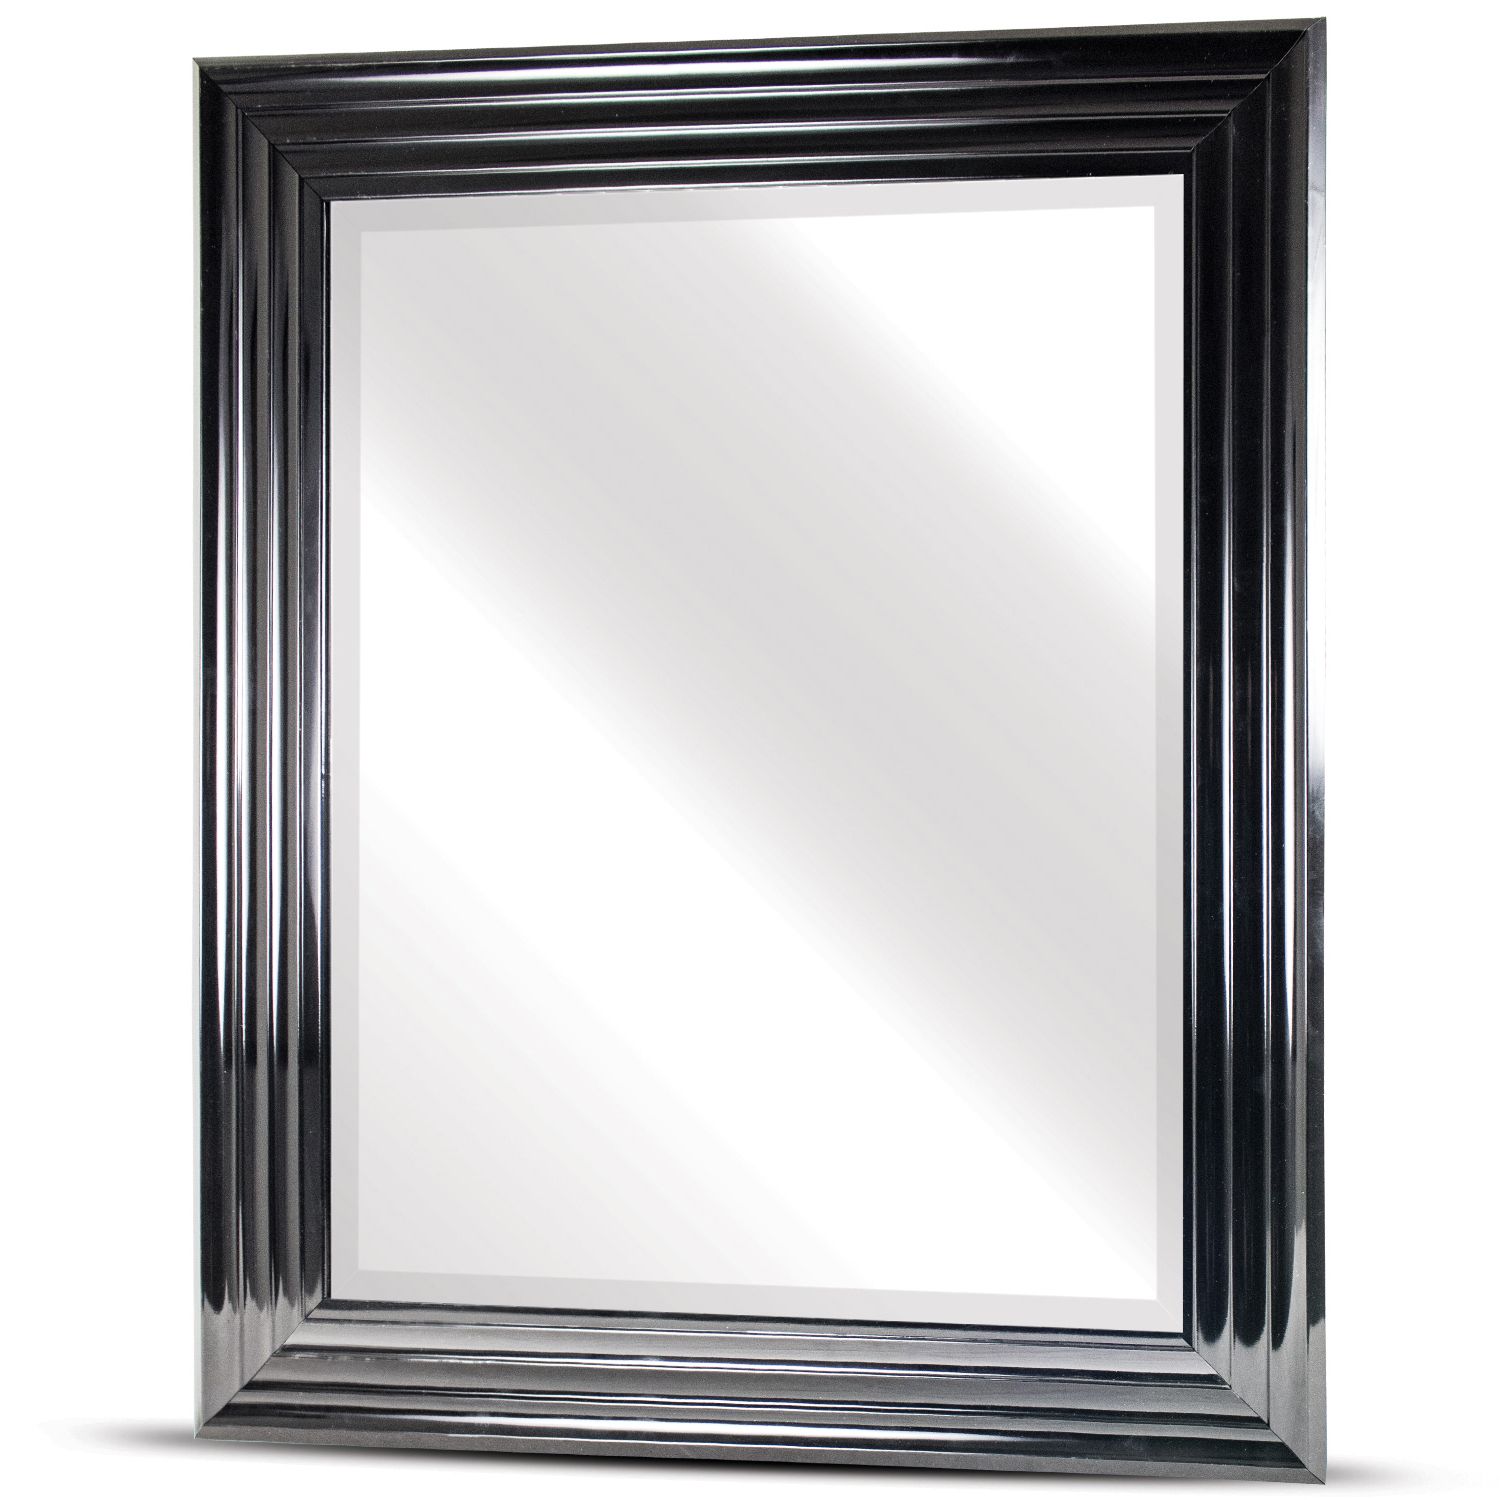 Current Black Beaded Rectangular Wall Mirrors Inside Black Everett Rectangular Wall Vanity Mirror – Pier (View 15 of 15)